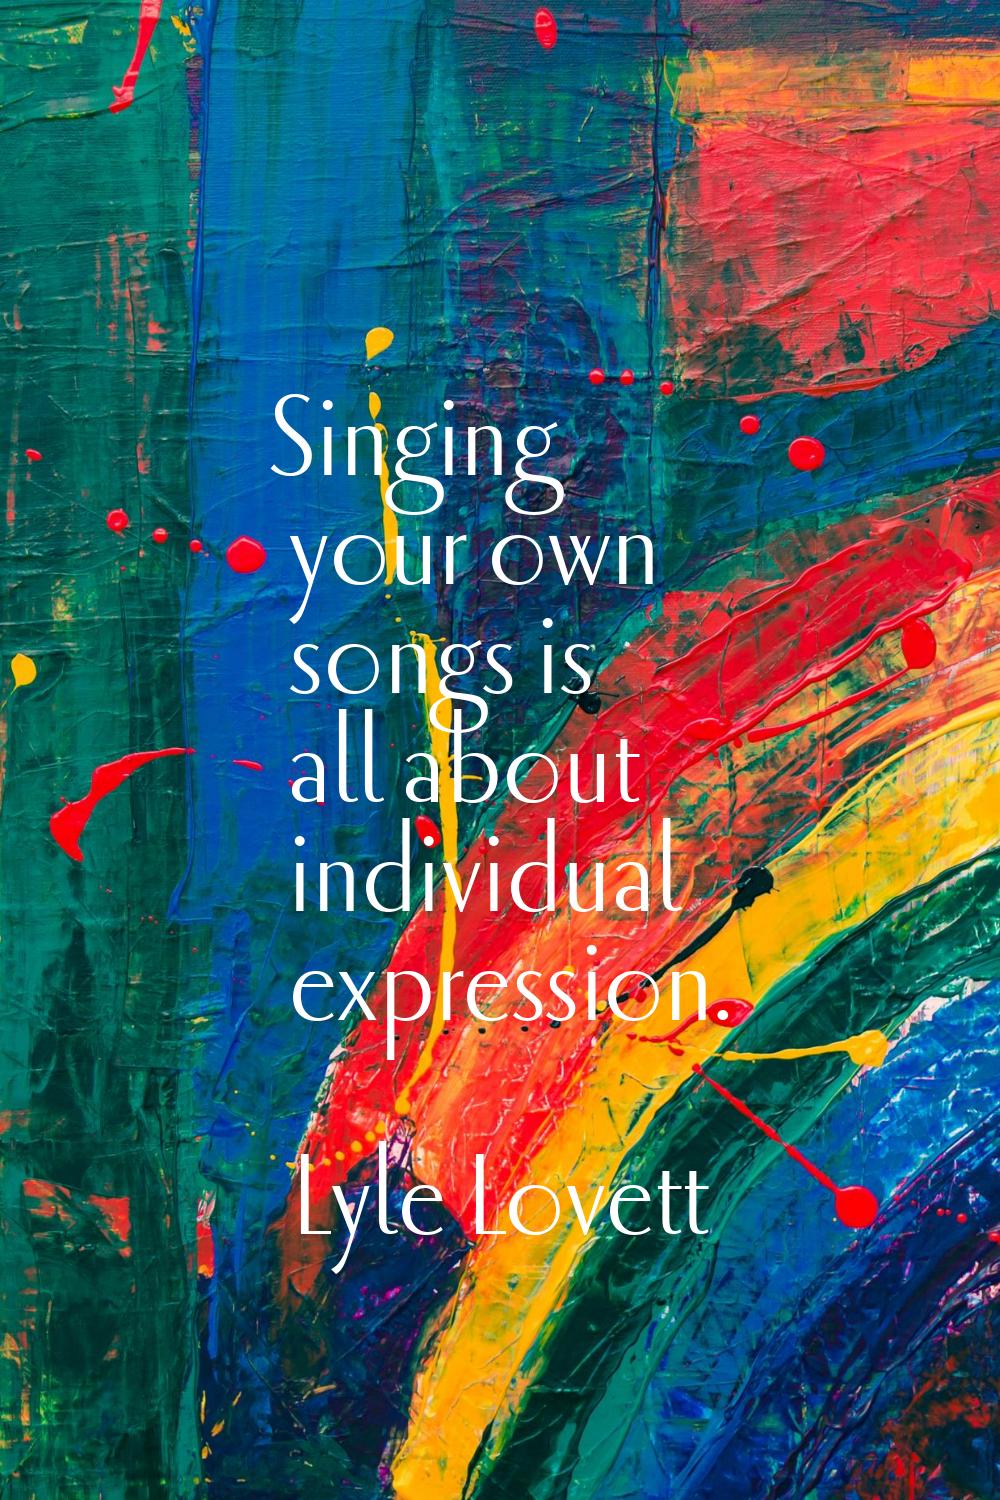 Singing your own songs is all about individual expression.